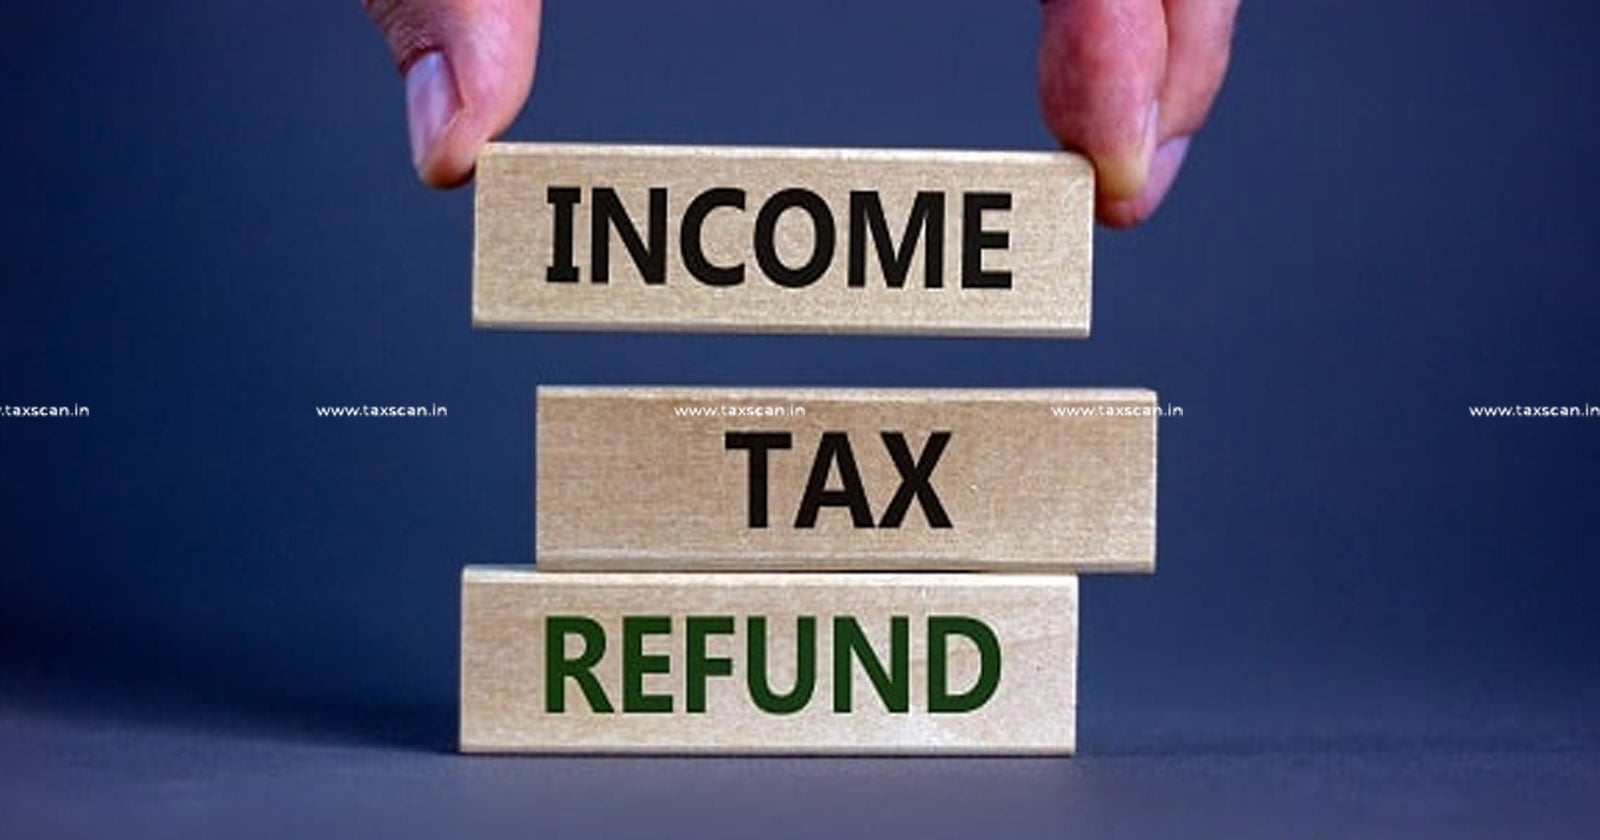 Income Tax Refund Adjusted - Income Tax Refund - Tax Refund - Refund Adjusted - Income Tax Adjusted - Outstanding Demands - TAXSCAN